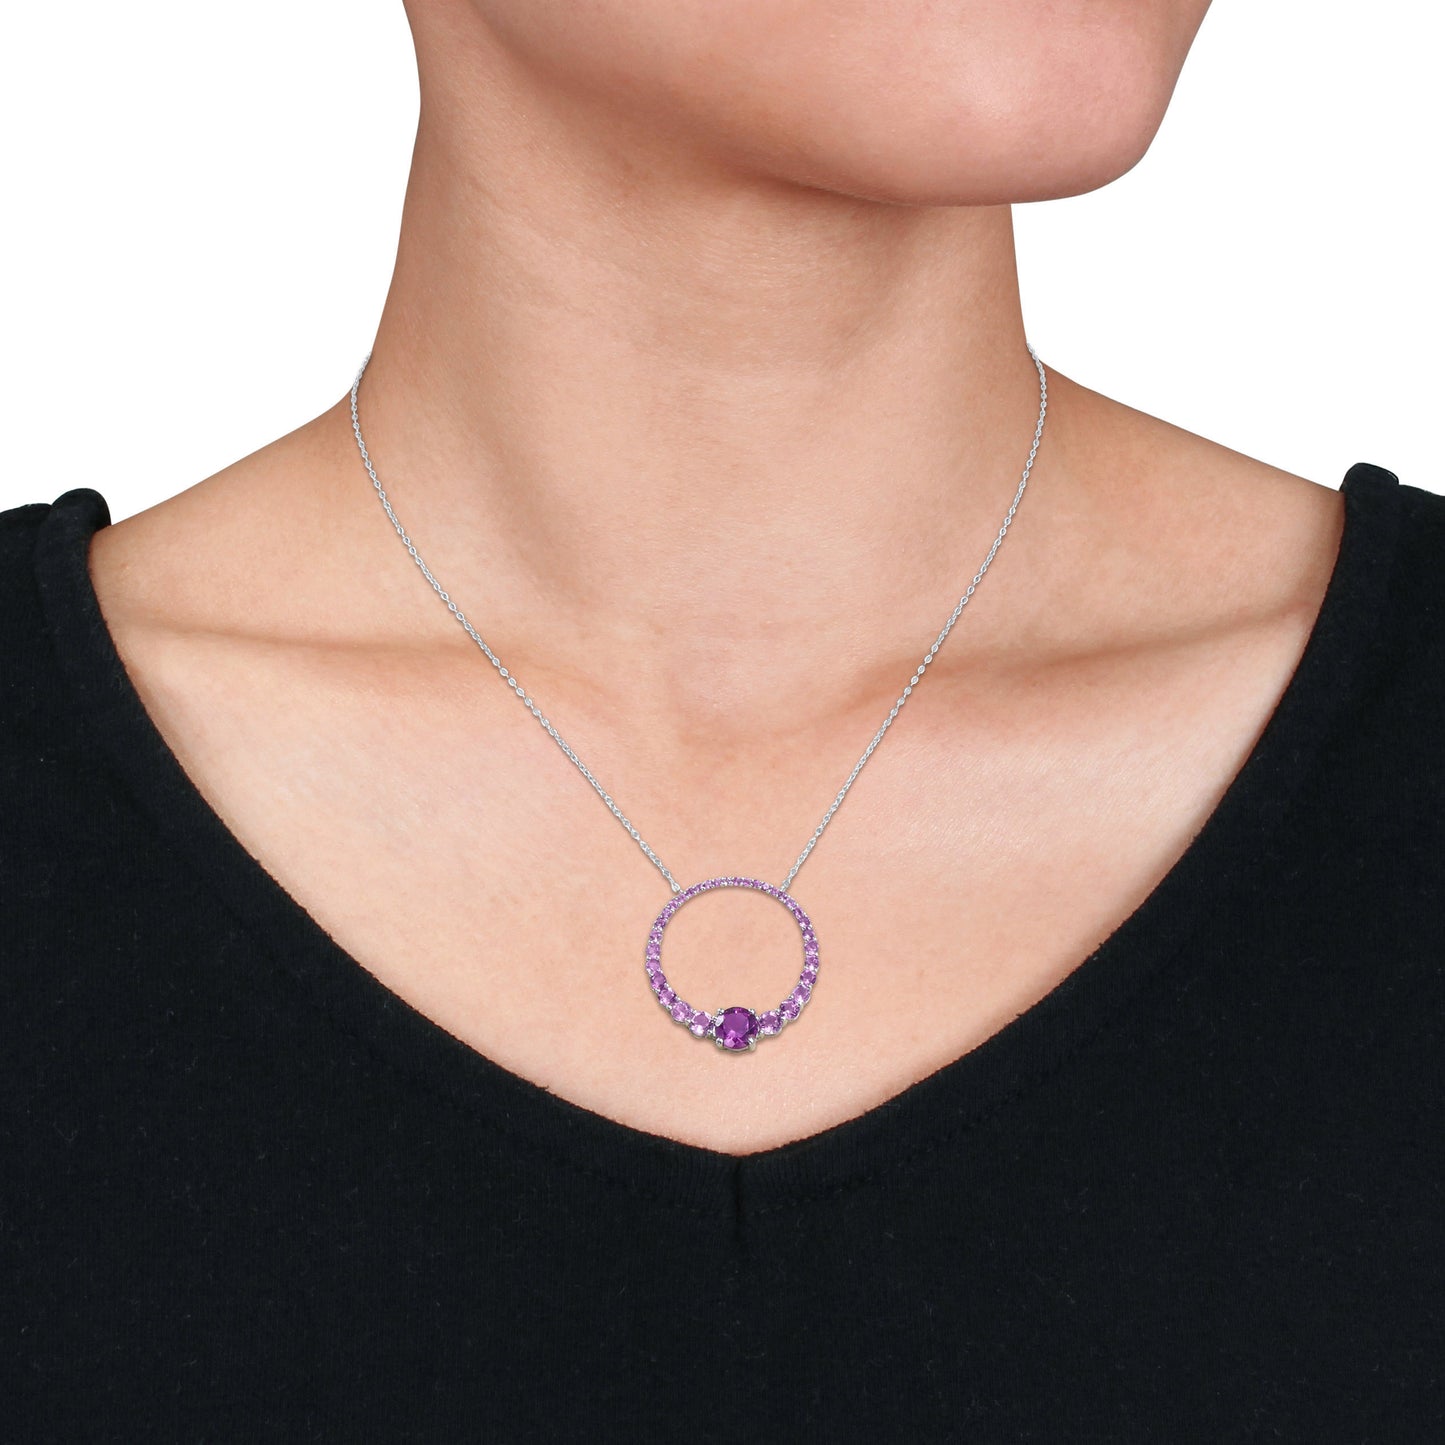 3ct Amethyst Circle of Life Necklace in Sterling Silver